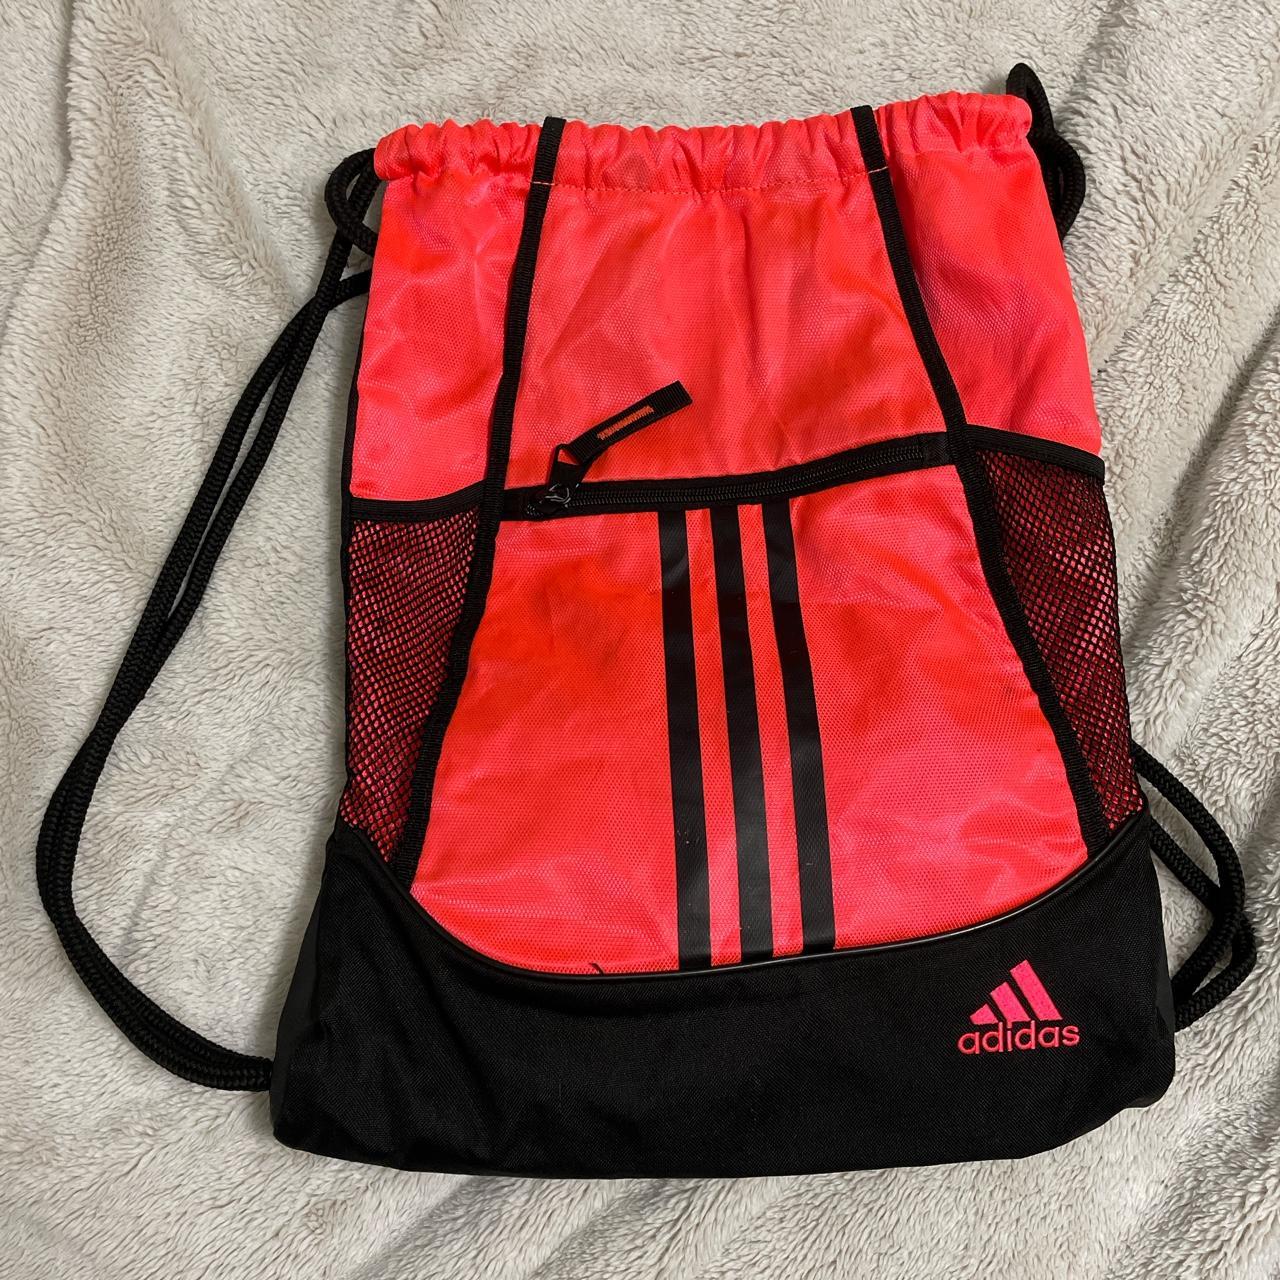 Adidas Draw String Backpack For The Gym Or Travel Bag Unisex Blue | eBay